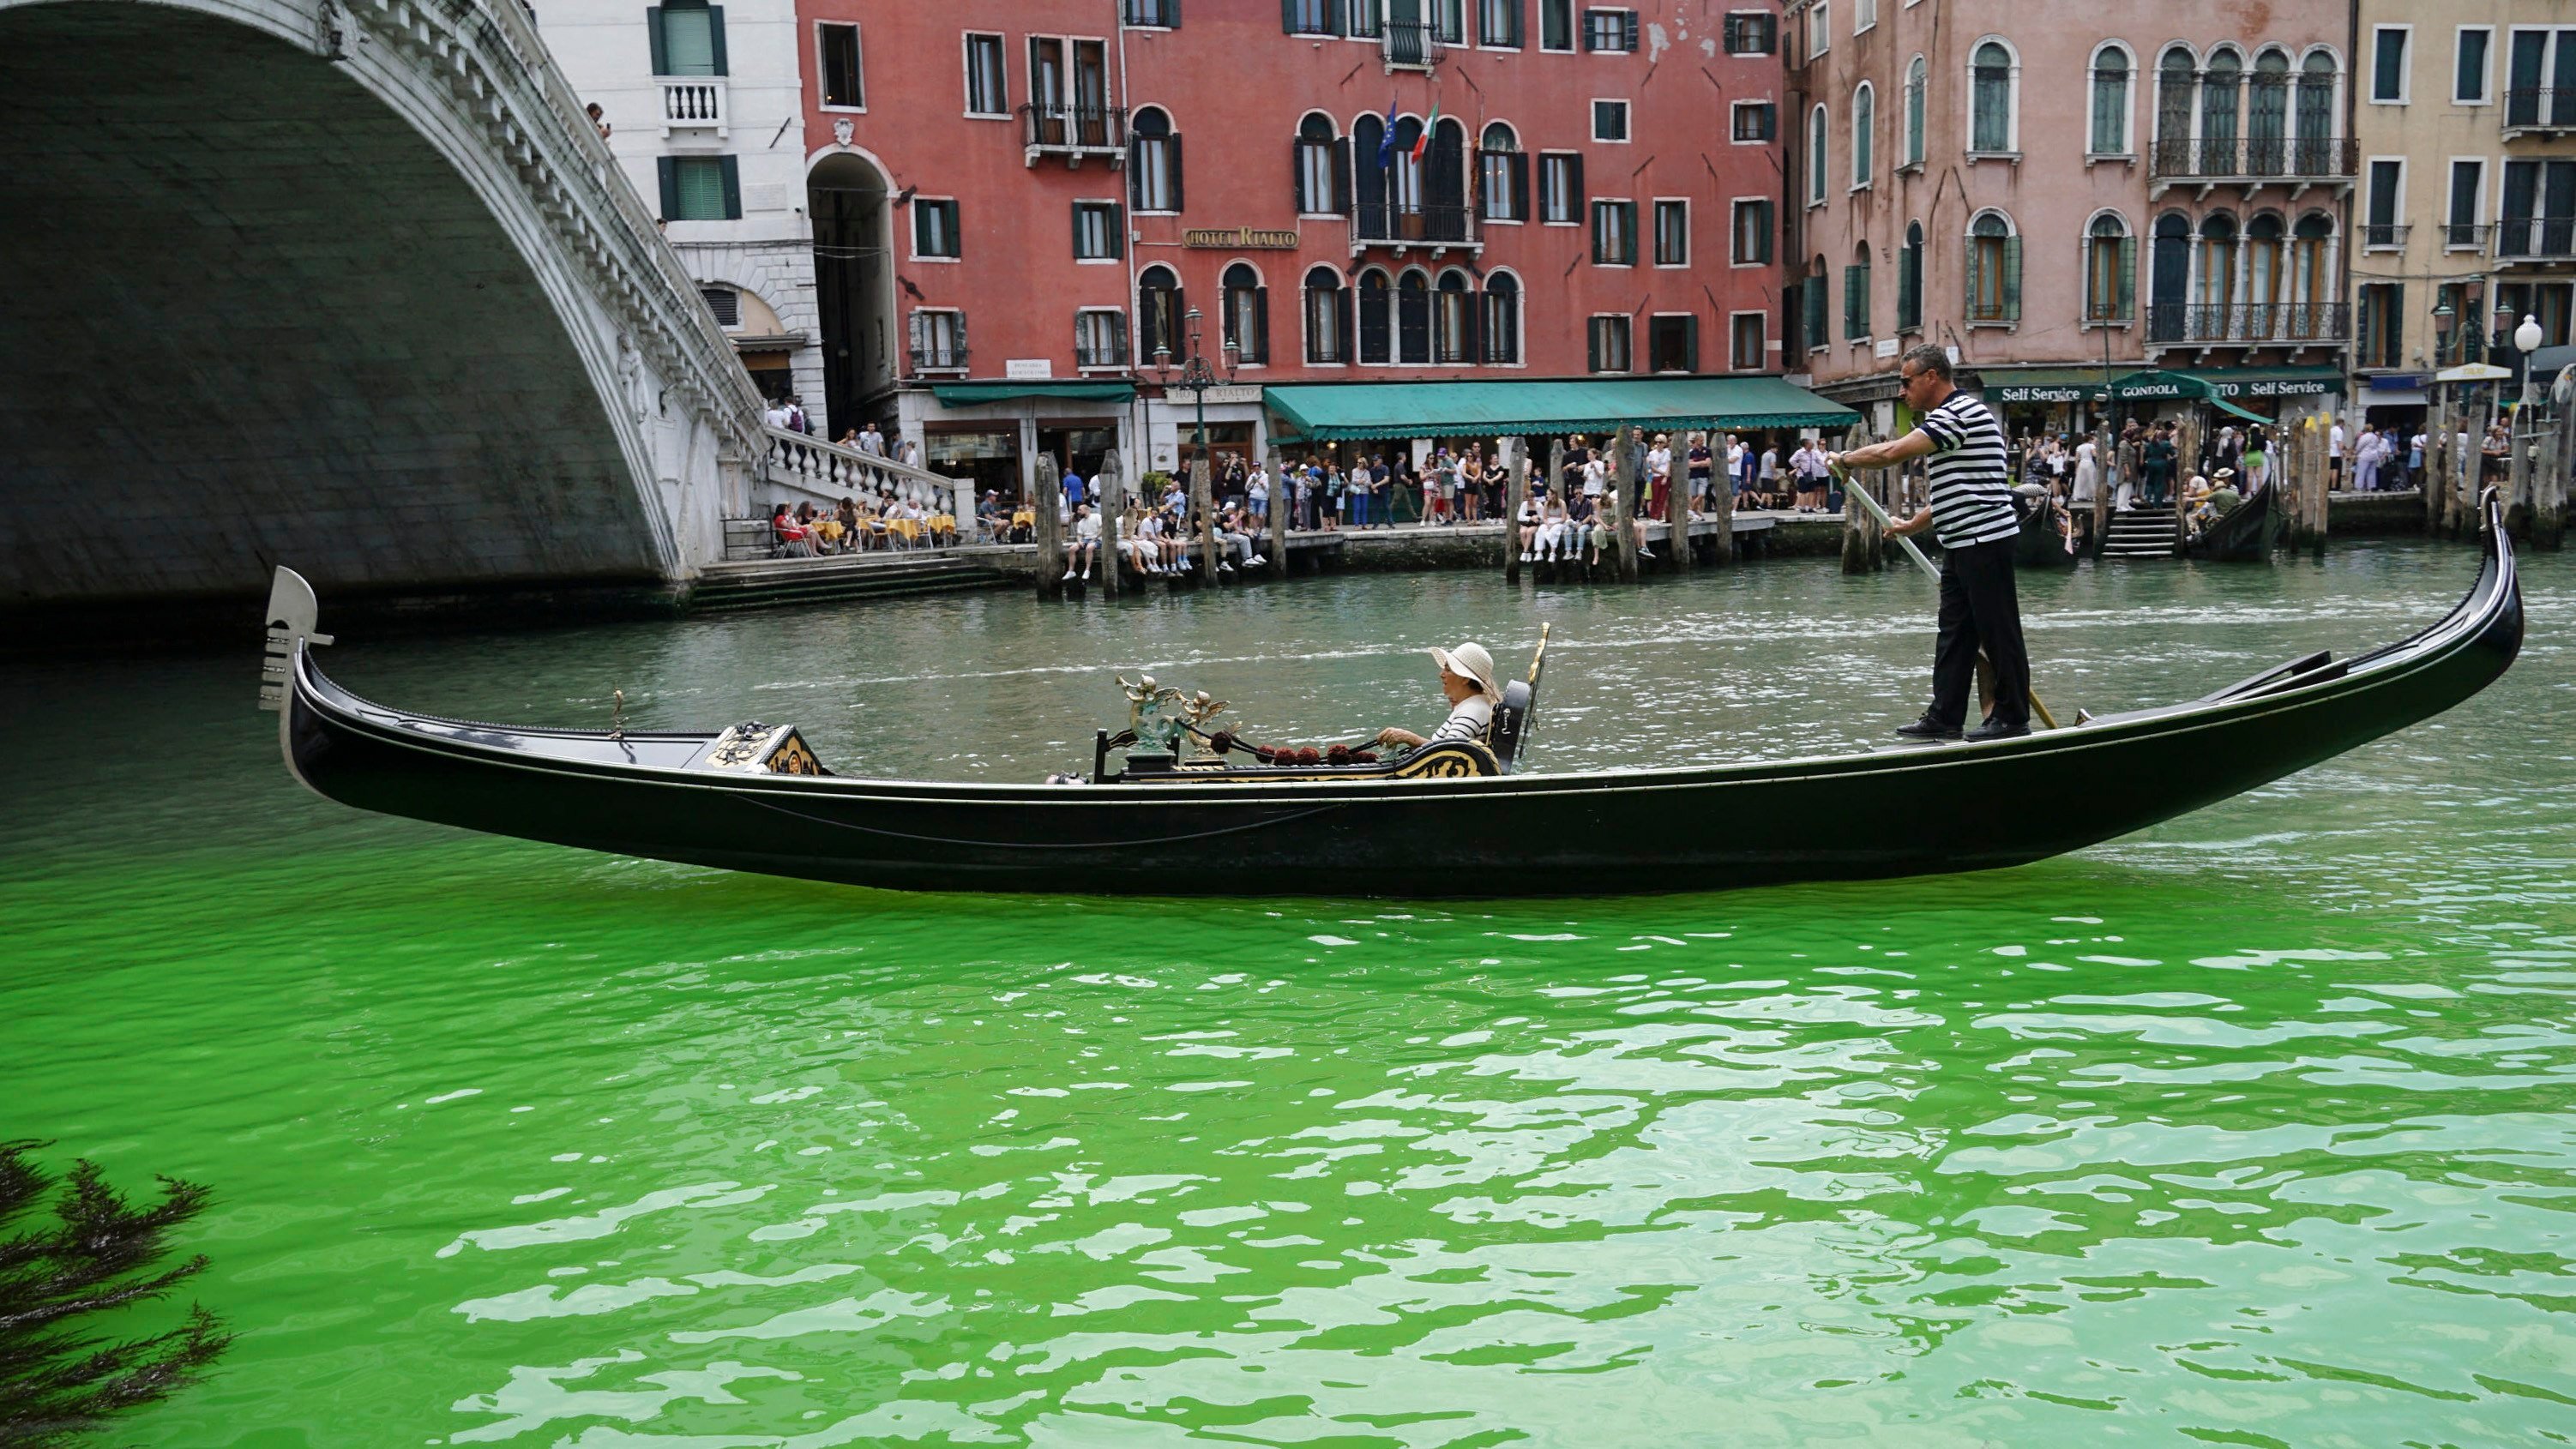 A gondola moves along a patch of phosphorescent green water in Venice, Italy, on Sunday. Photo: EPA-EFE